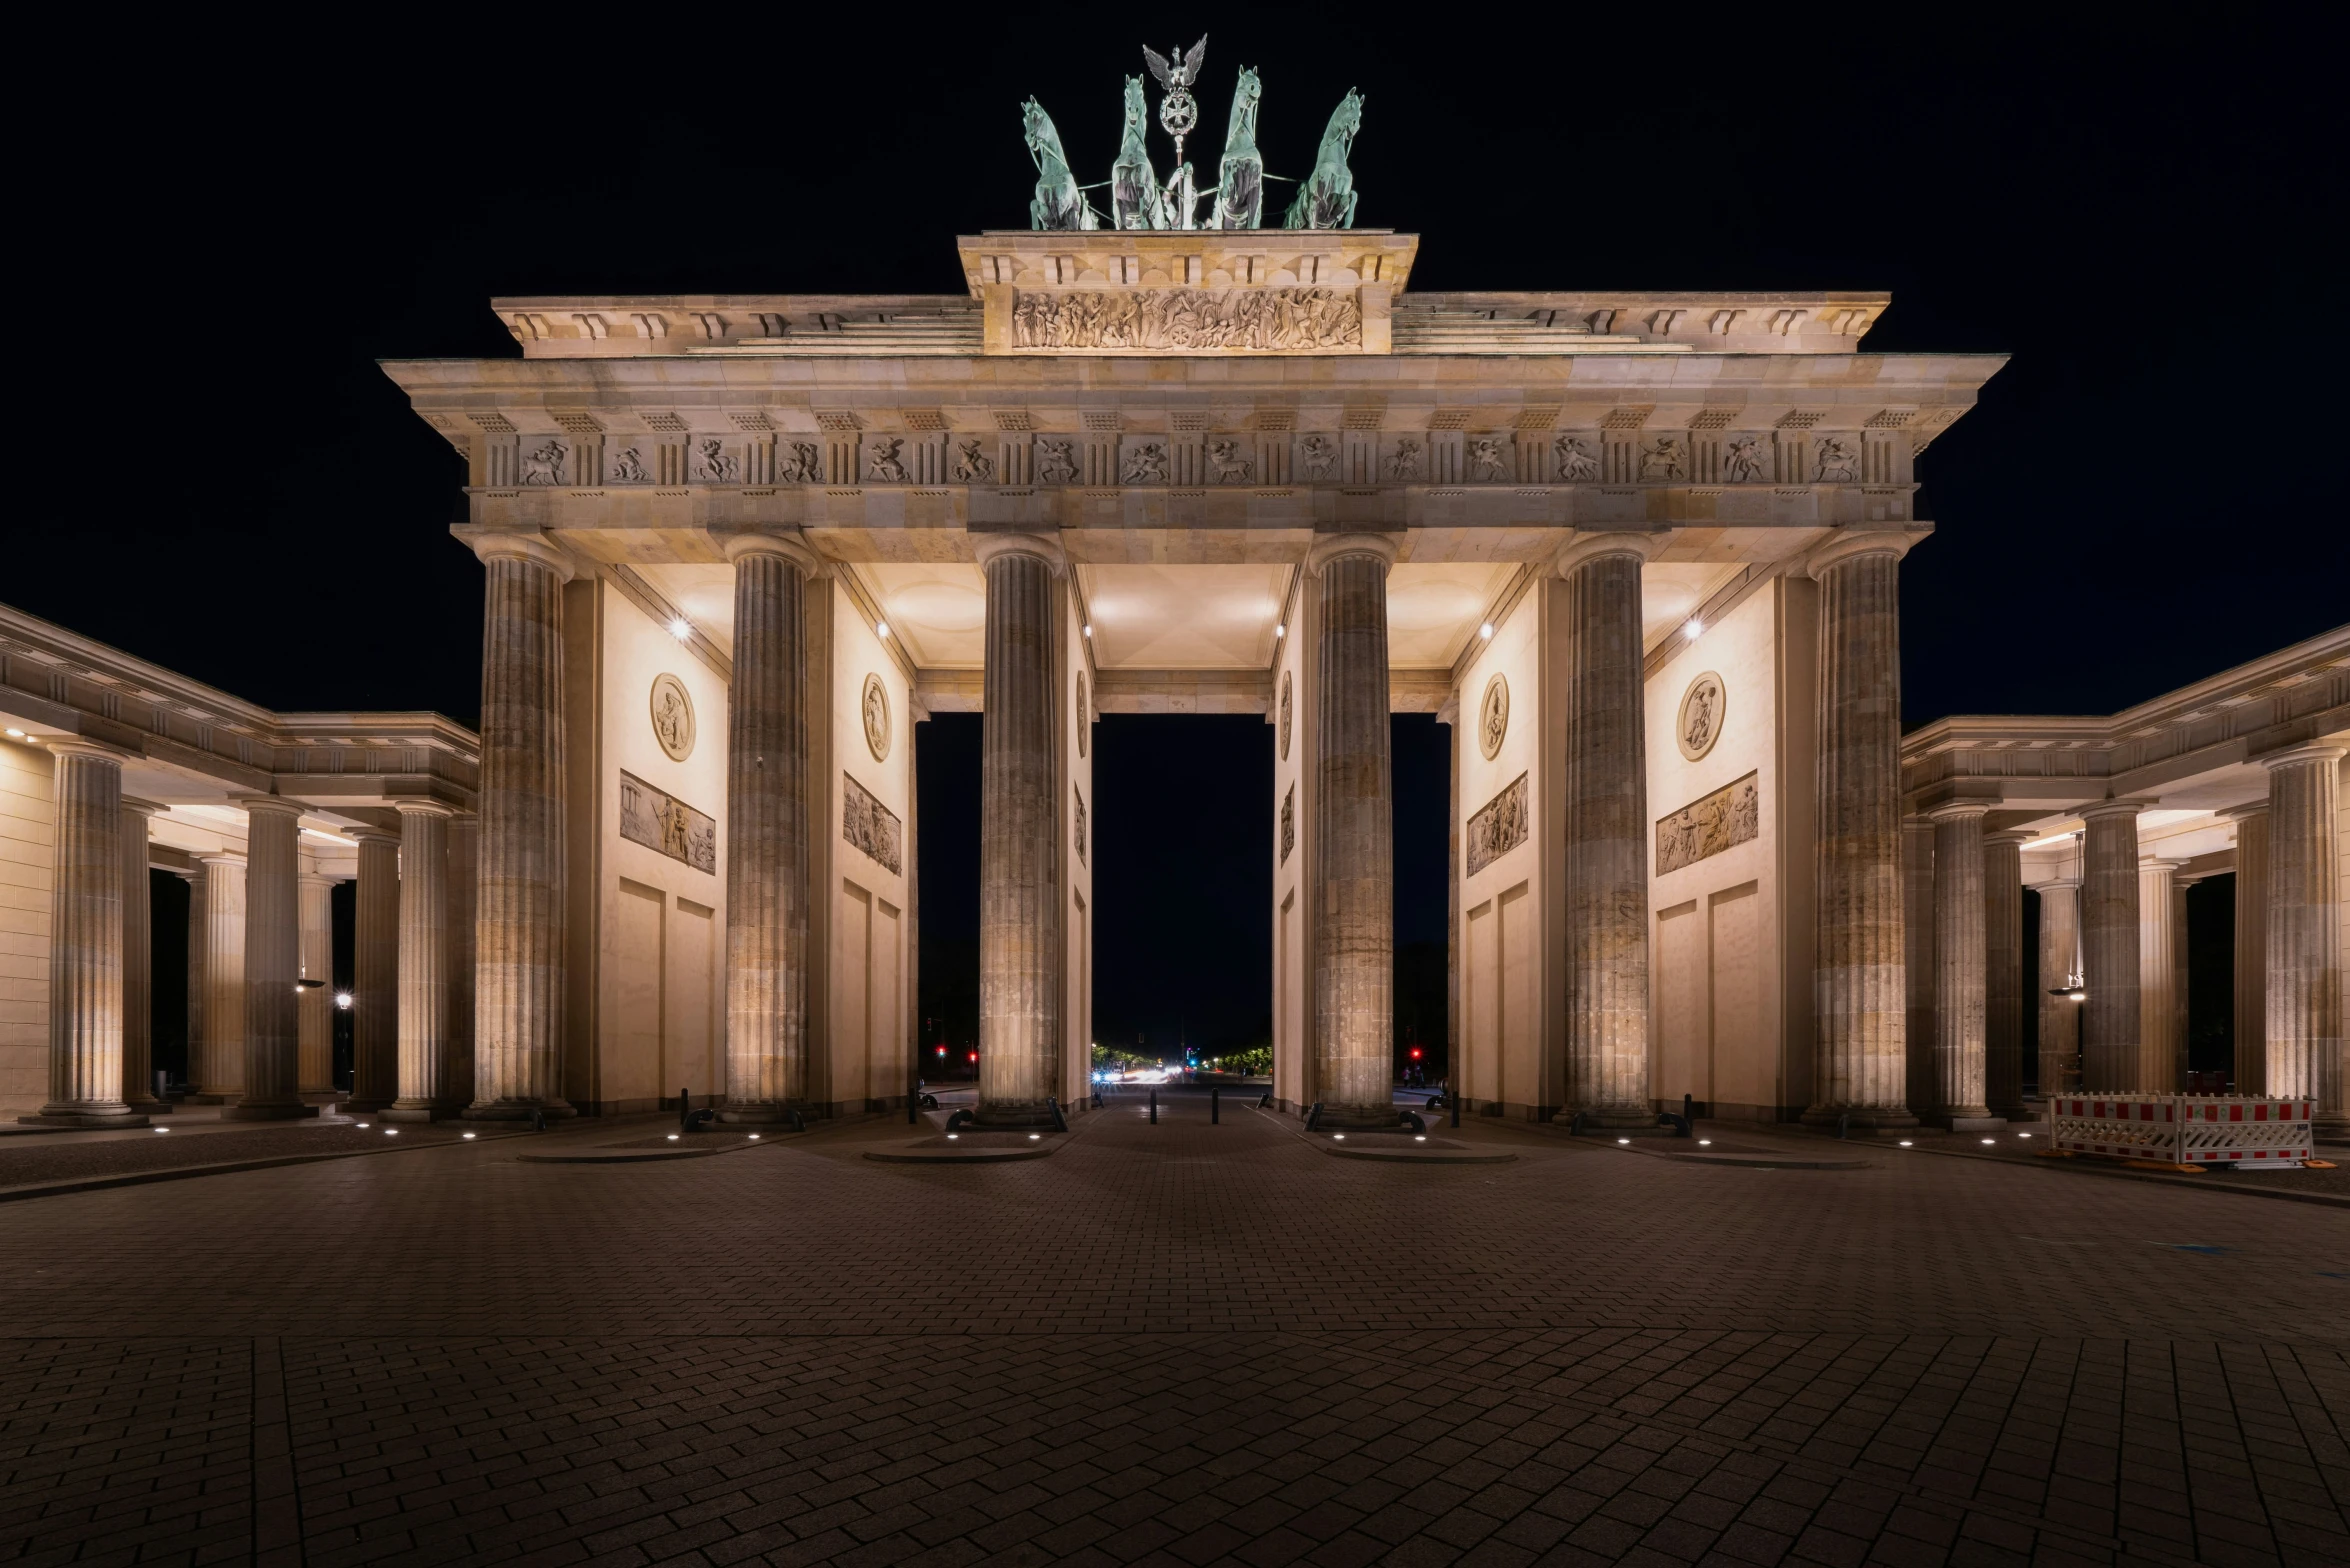 a pograph of a monument with columns at night